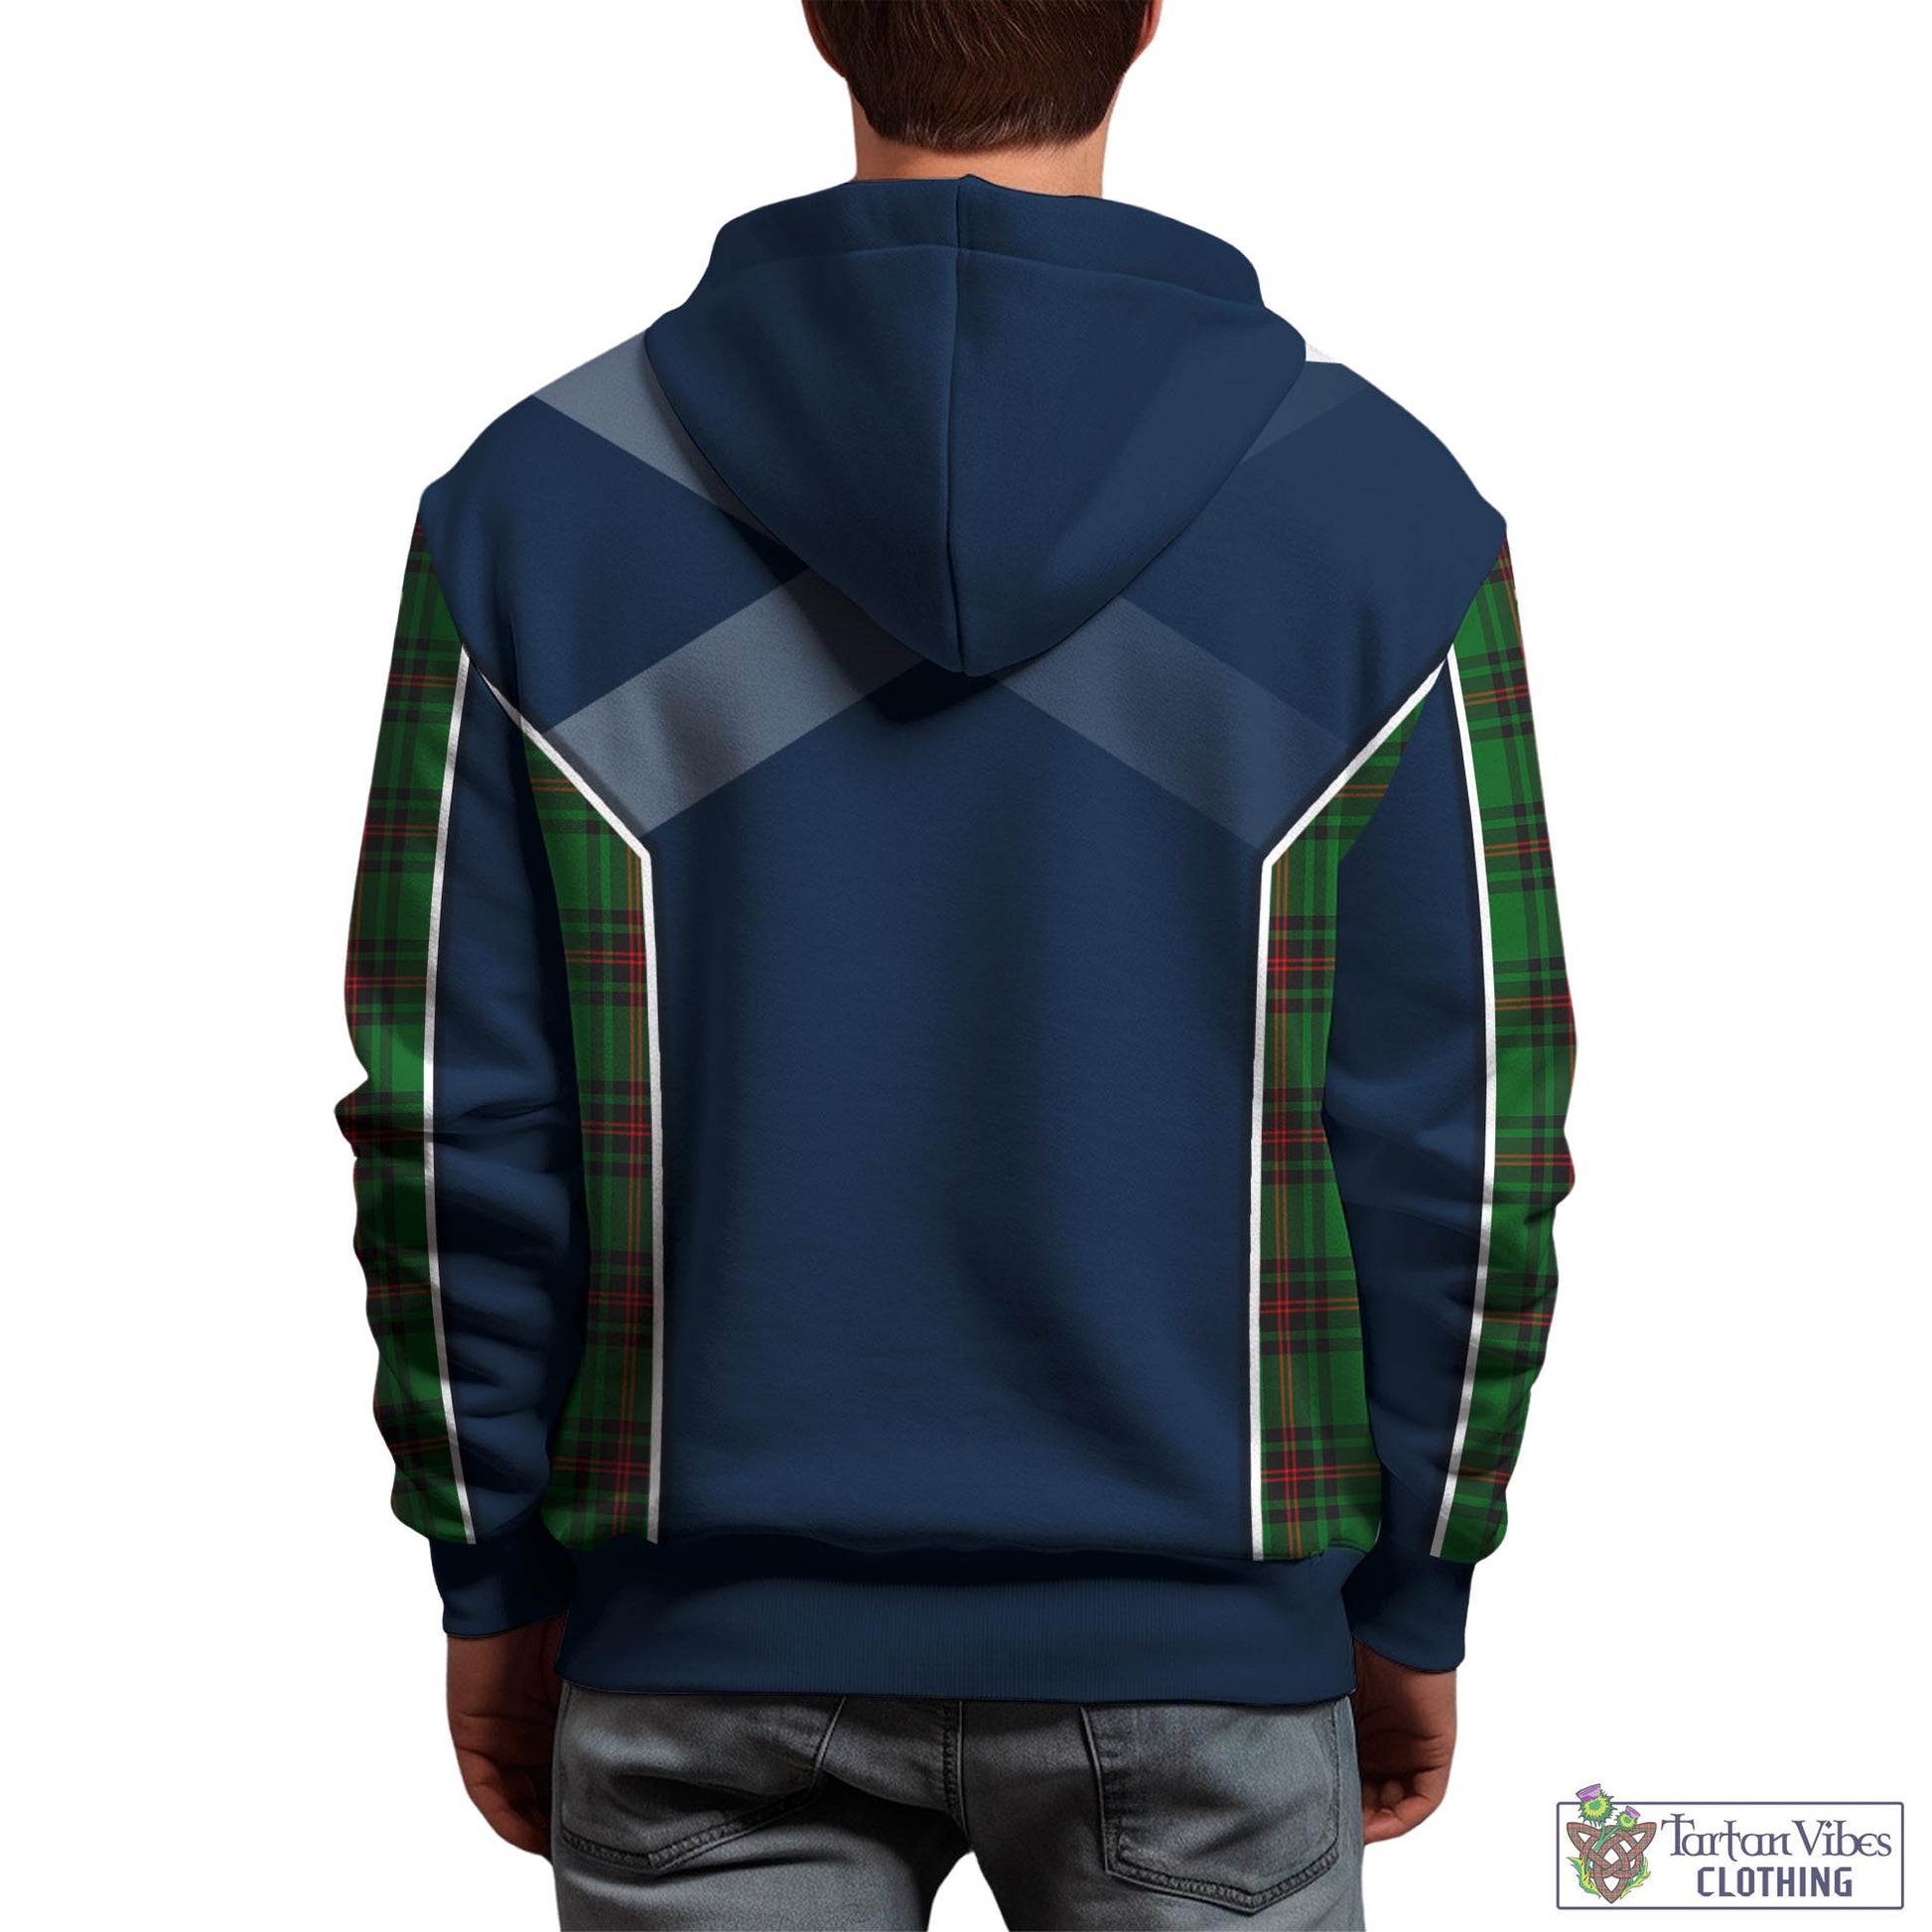 Tartan Vibes Clothing Primrose Tartan Hoodie with Family Crest and Scottish Thistle Vibes Sport Style